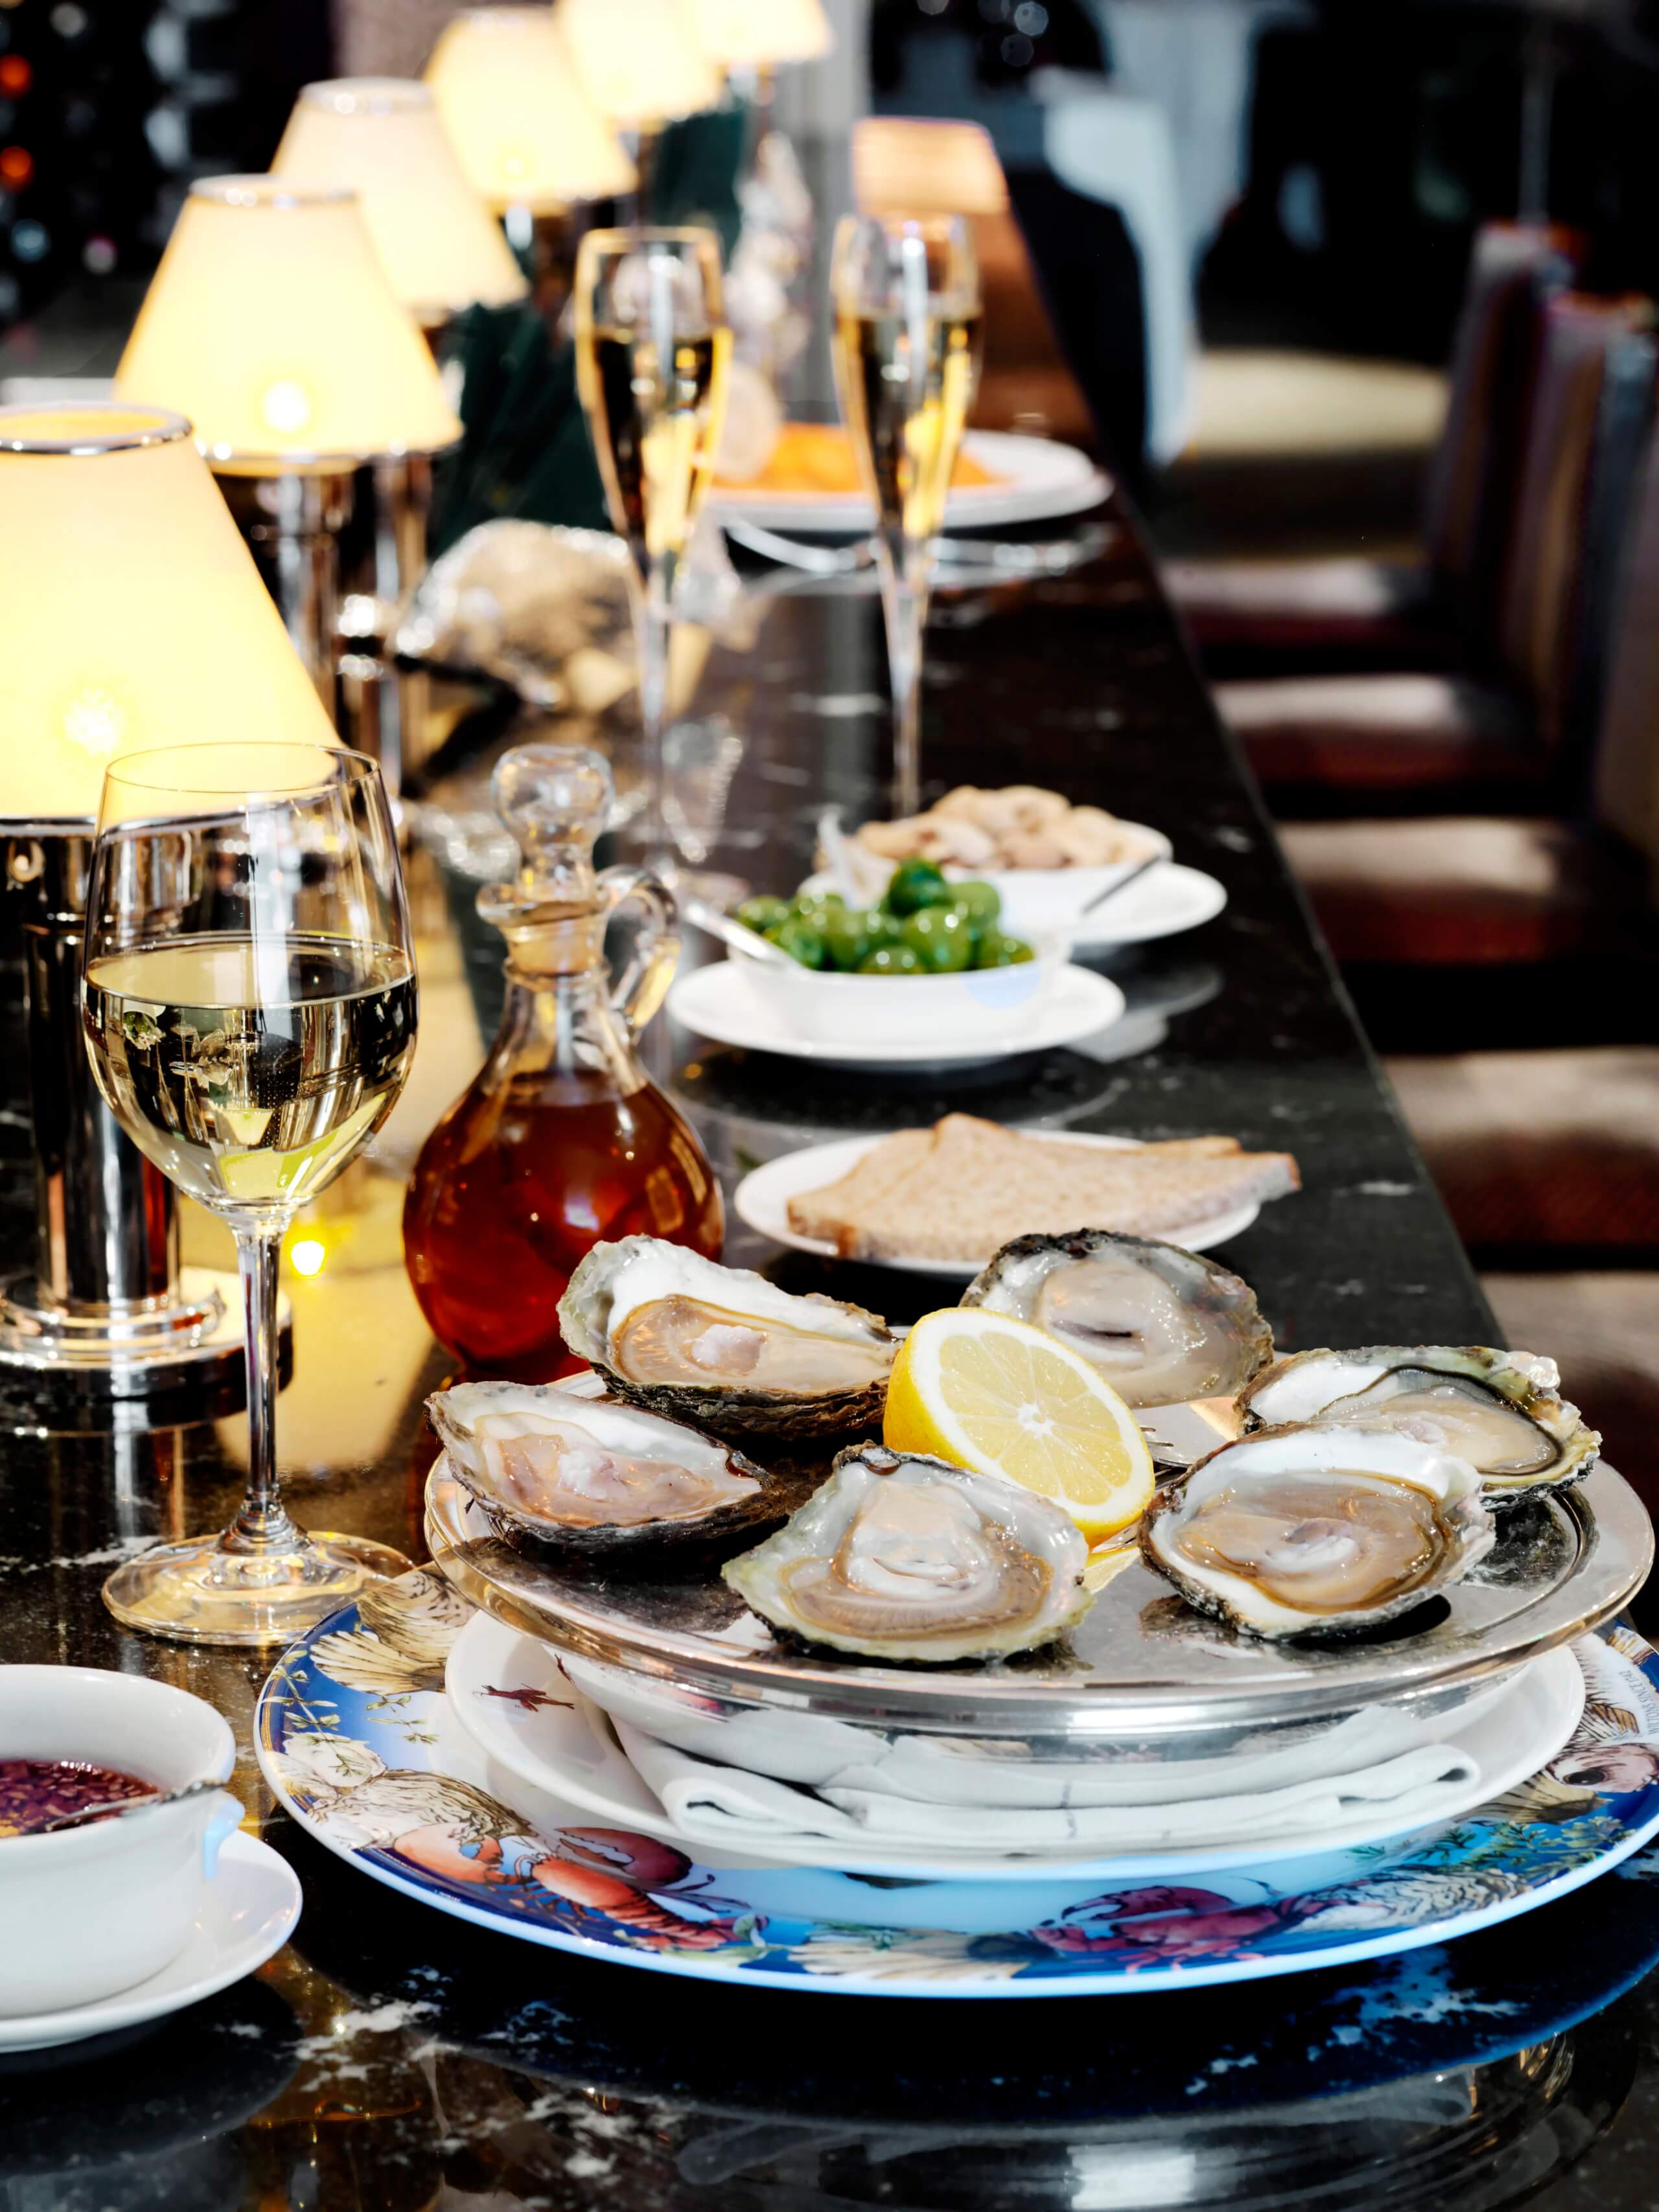 Wiltons - Oysters on bar evening, champagne cocktails, bars in london, best bars in london, champagne tasting london, champagne bars london, cocktail bars london,champagne bar london,  london nightlife, london bars, london cocktails